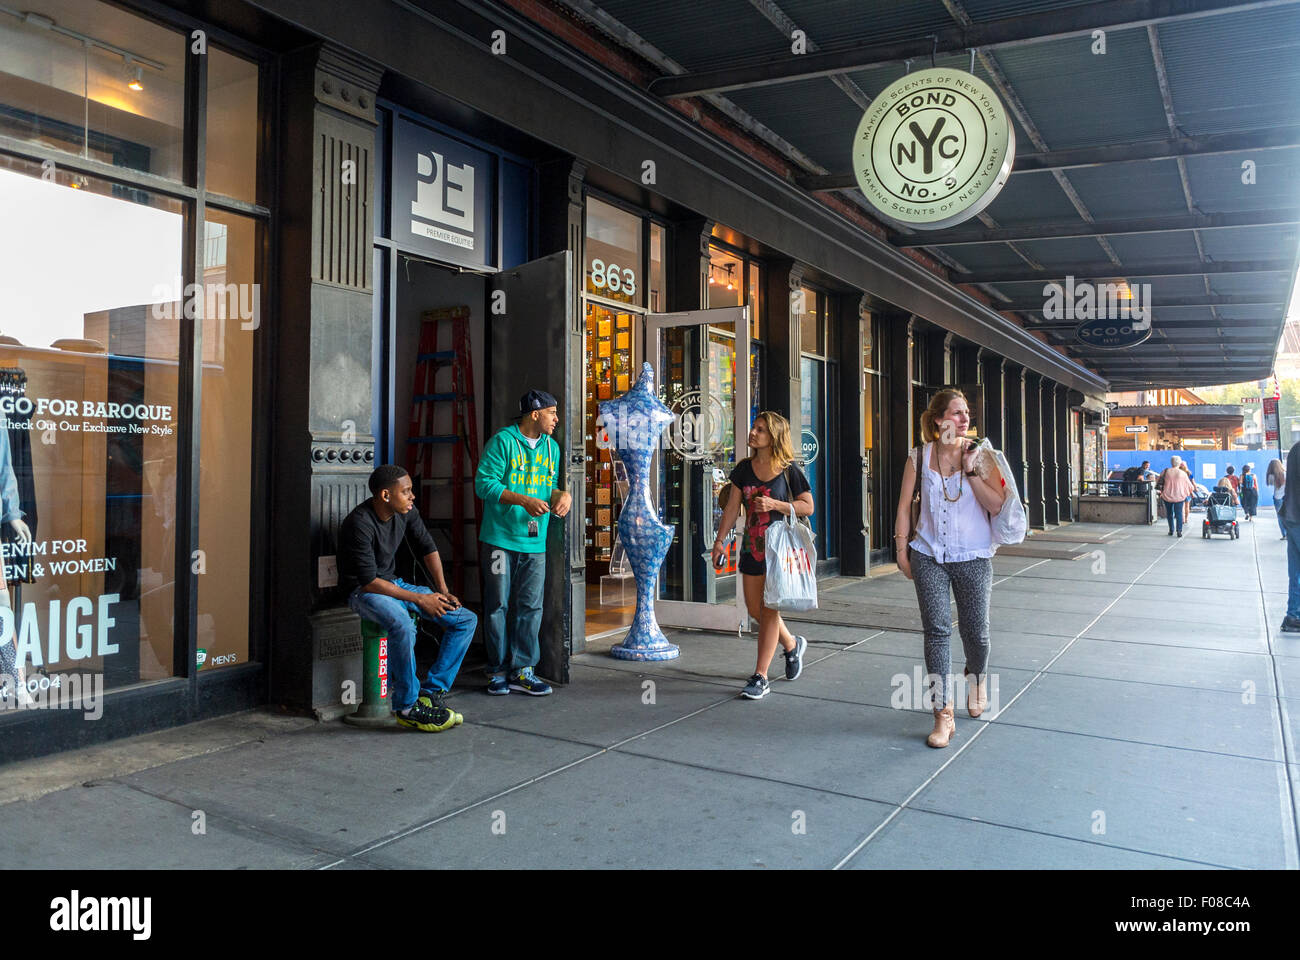 New York City, USA, Street Scenes, Meat Packing District, Women Shopping, Luxury Clothing Fashion Shops, garment shops exterior Stock Photo